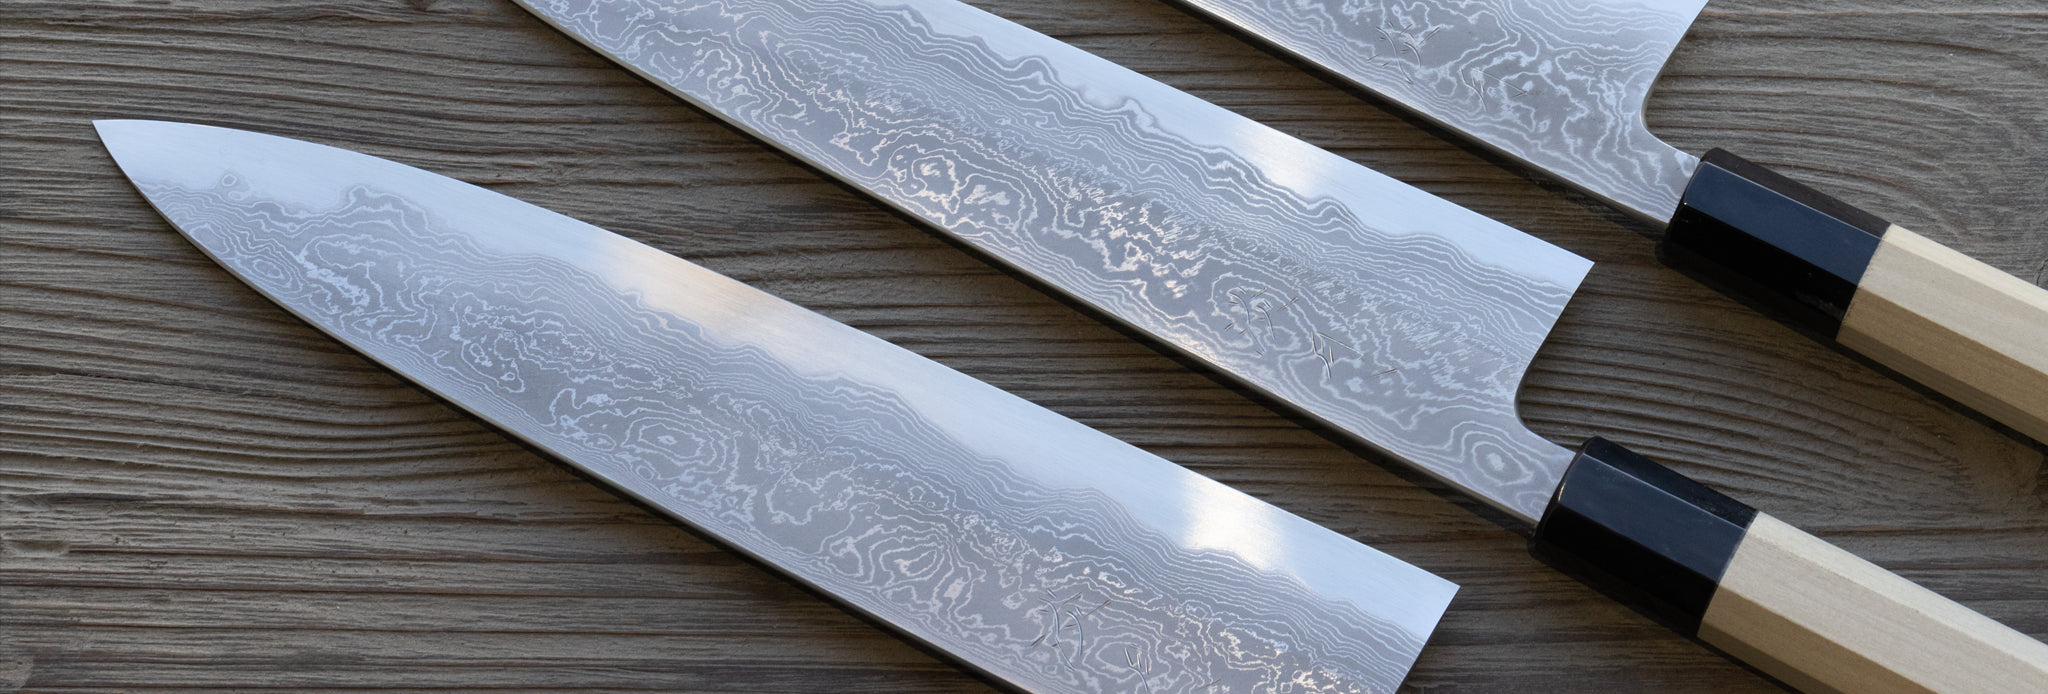  Online Japanese Kitchen Knives with Free Shipping